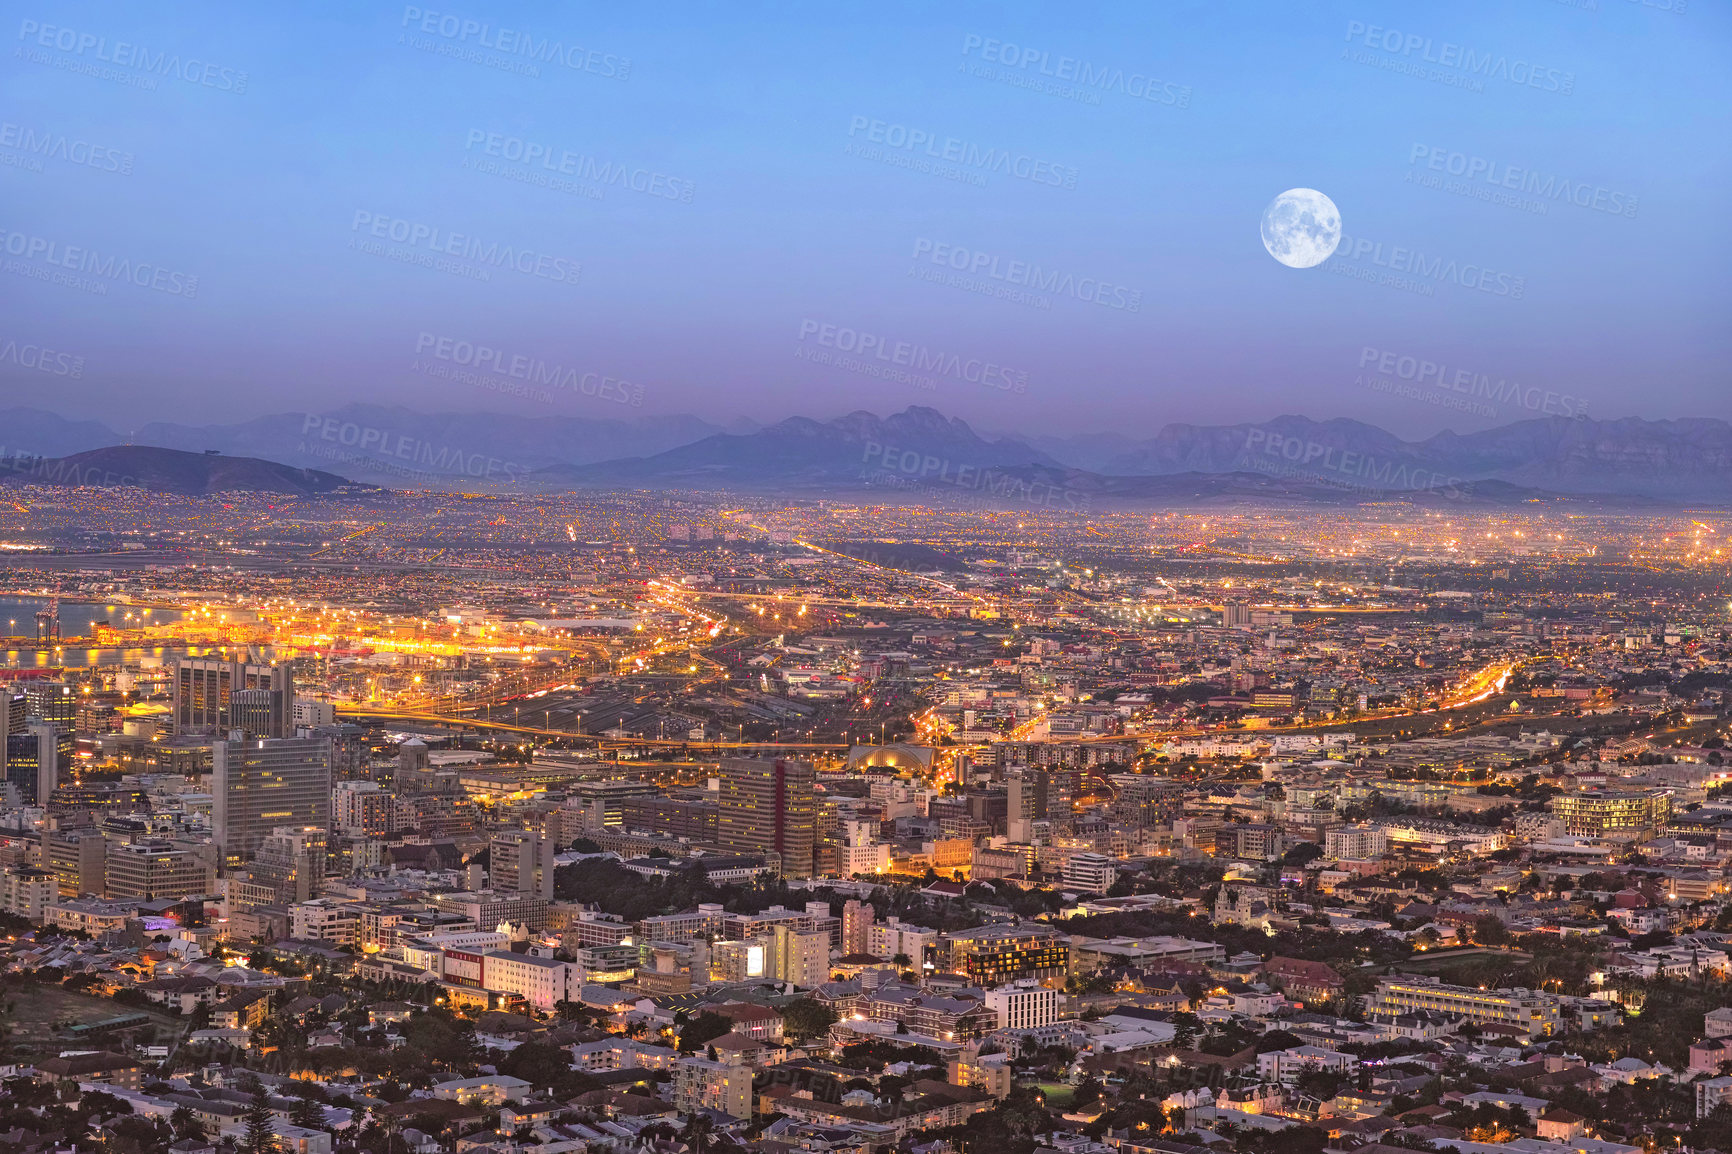 Buy stock photo Copy space night view of city buildings with electricity lights, infrastructure and moon with mountain background in travel destination. Cape Town, South Africa downtown centre and urban architecture